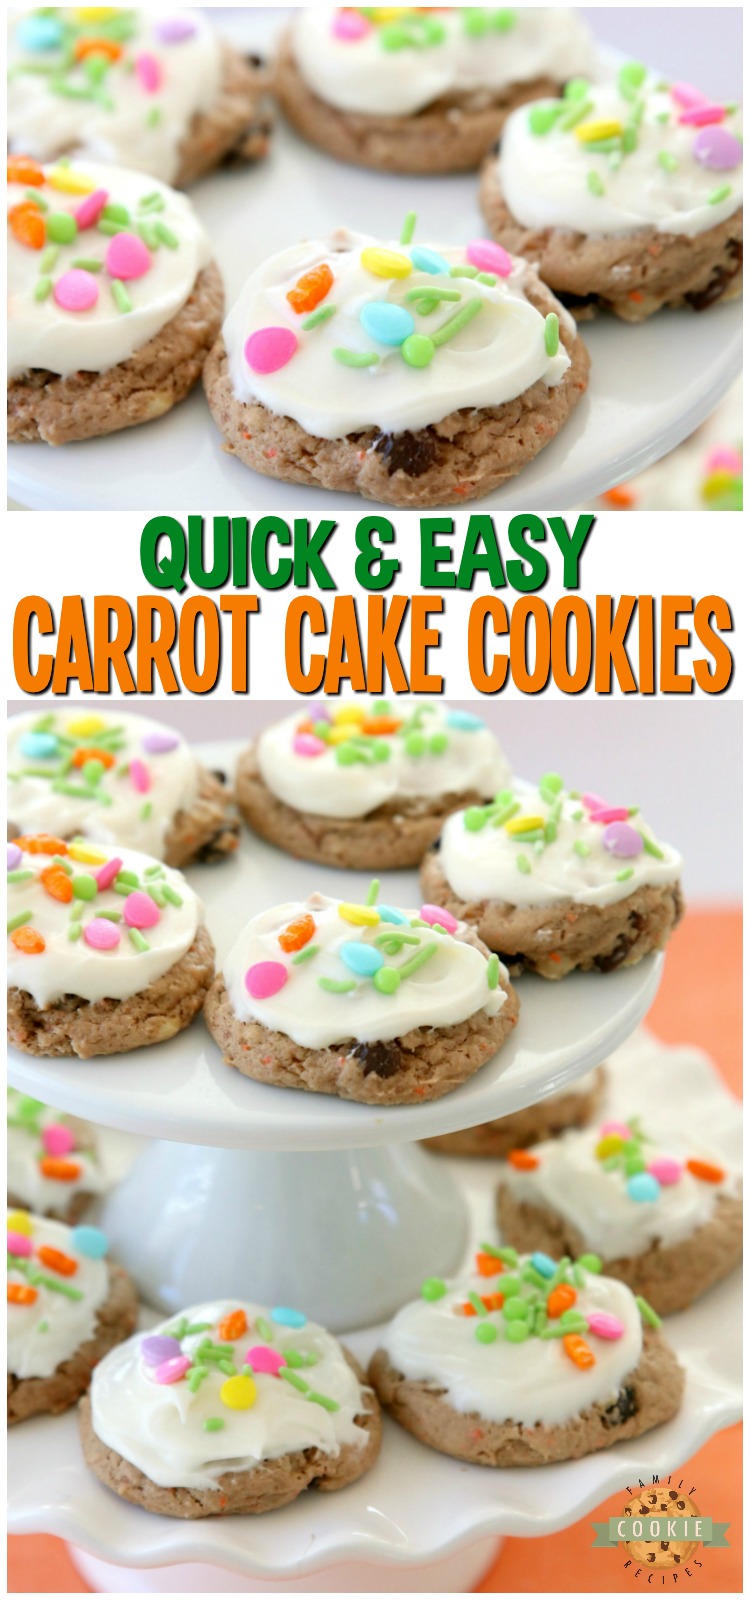 Carrot Cake Cookies are soft and chewy, flavorful carrot cake cookies made with a cake mix! Topped with a creamy cheesecake frosting, these carrot cake cookies are perfect for Easter!  #carrotcake #cookies #cakemix #cookie #Spring #Easter #recipe #dessert from FAMILY COOKIE RECIPES via @buttergirls